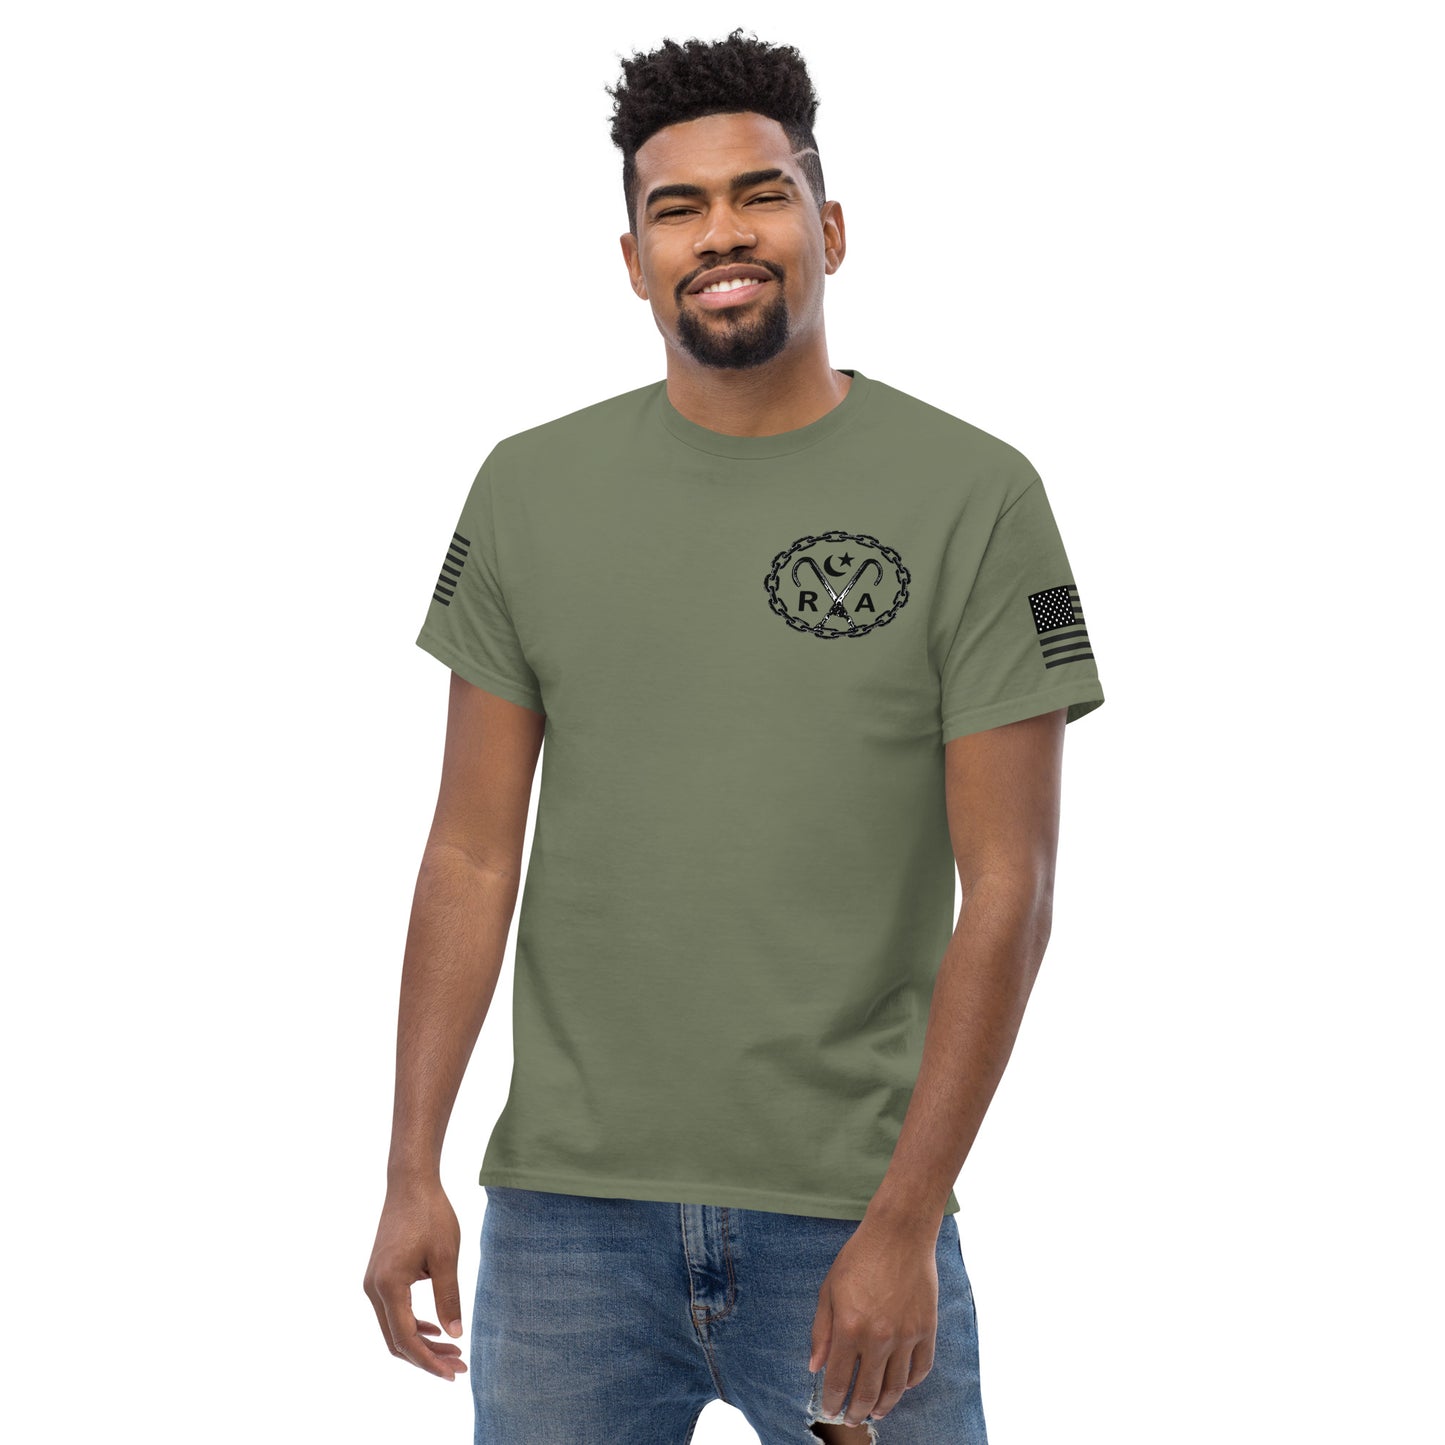 Hook and Chain - Black Ink Men's classic tee